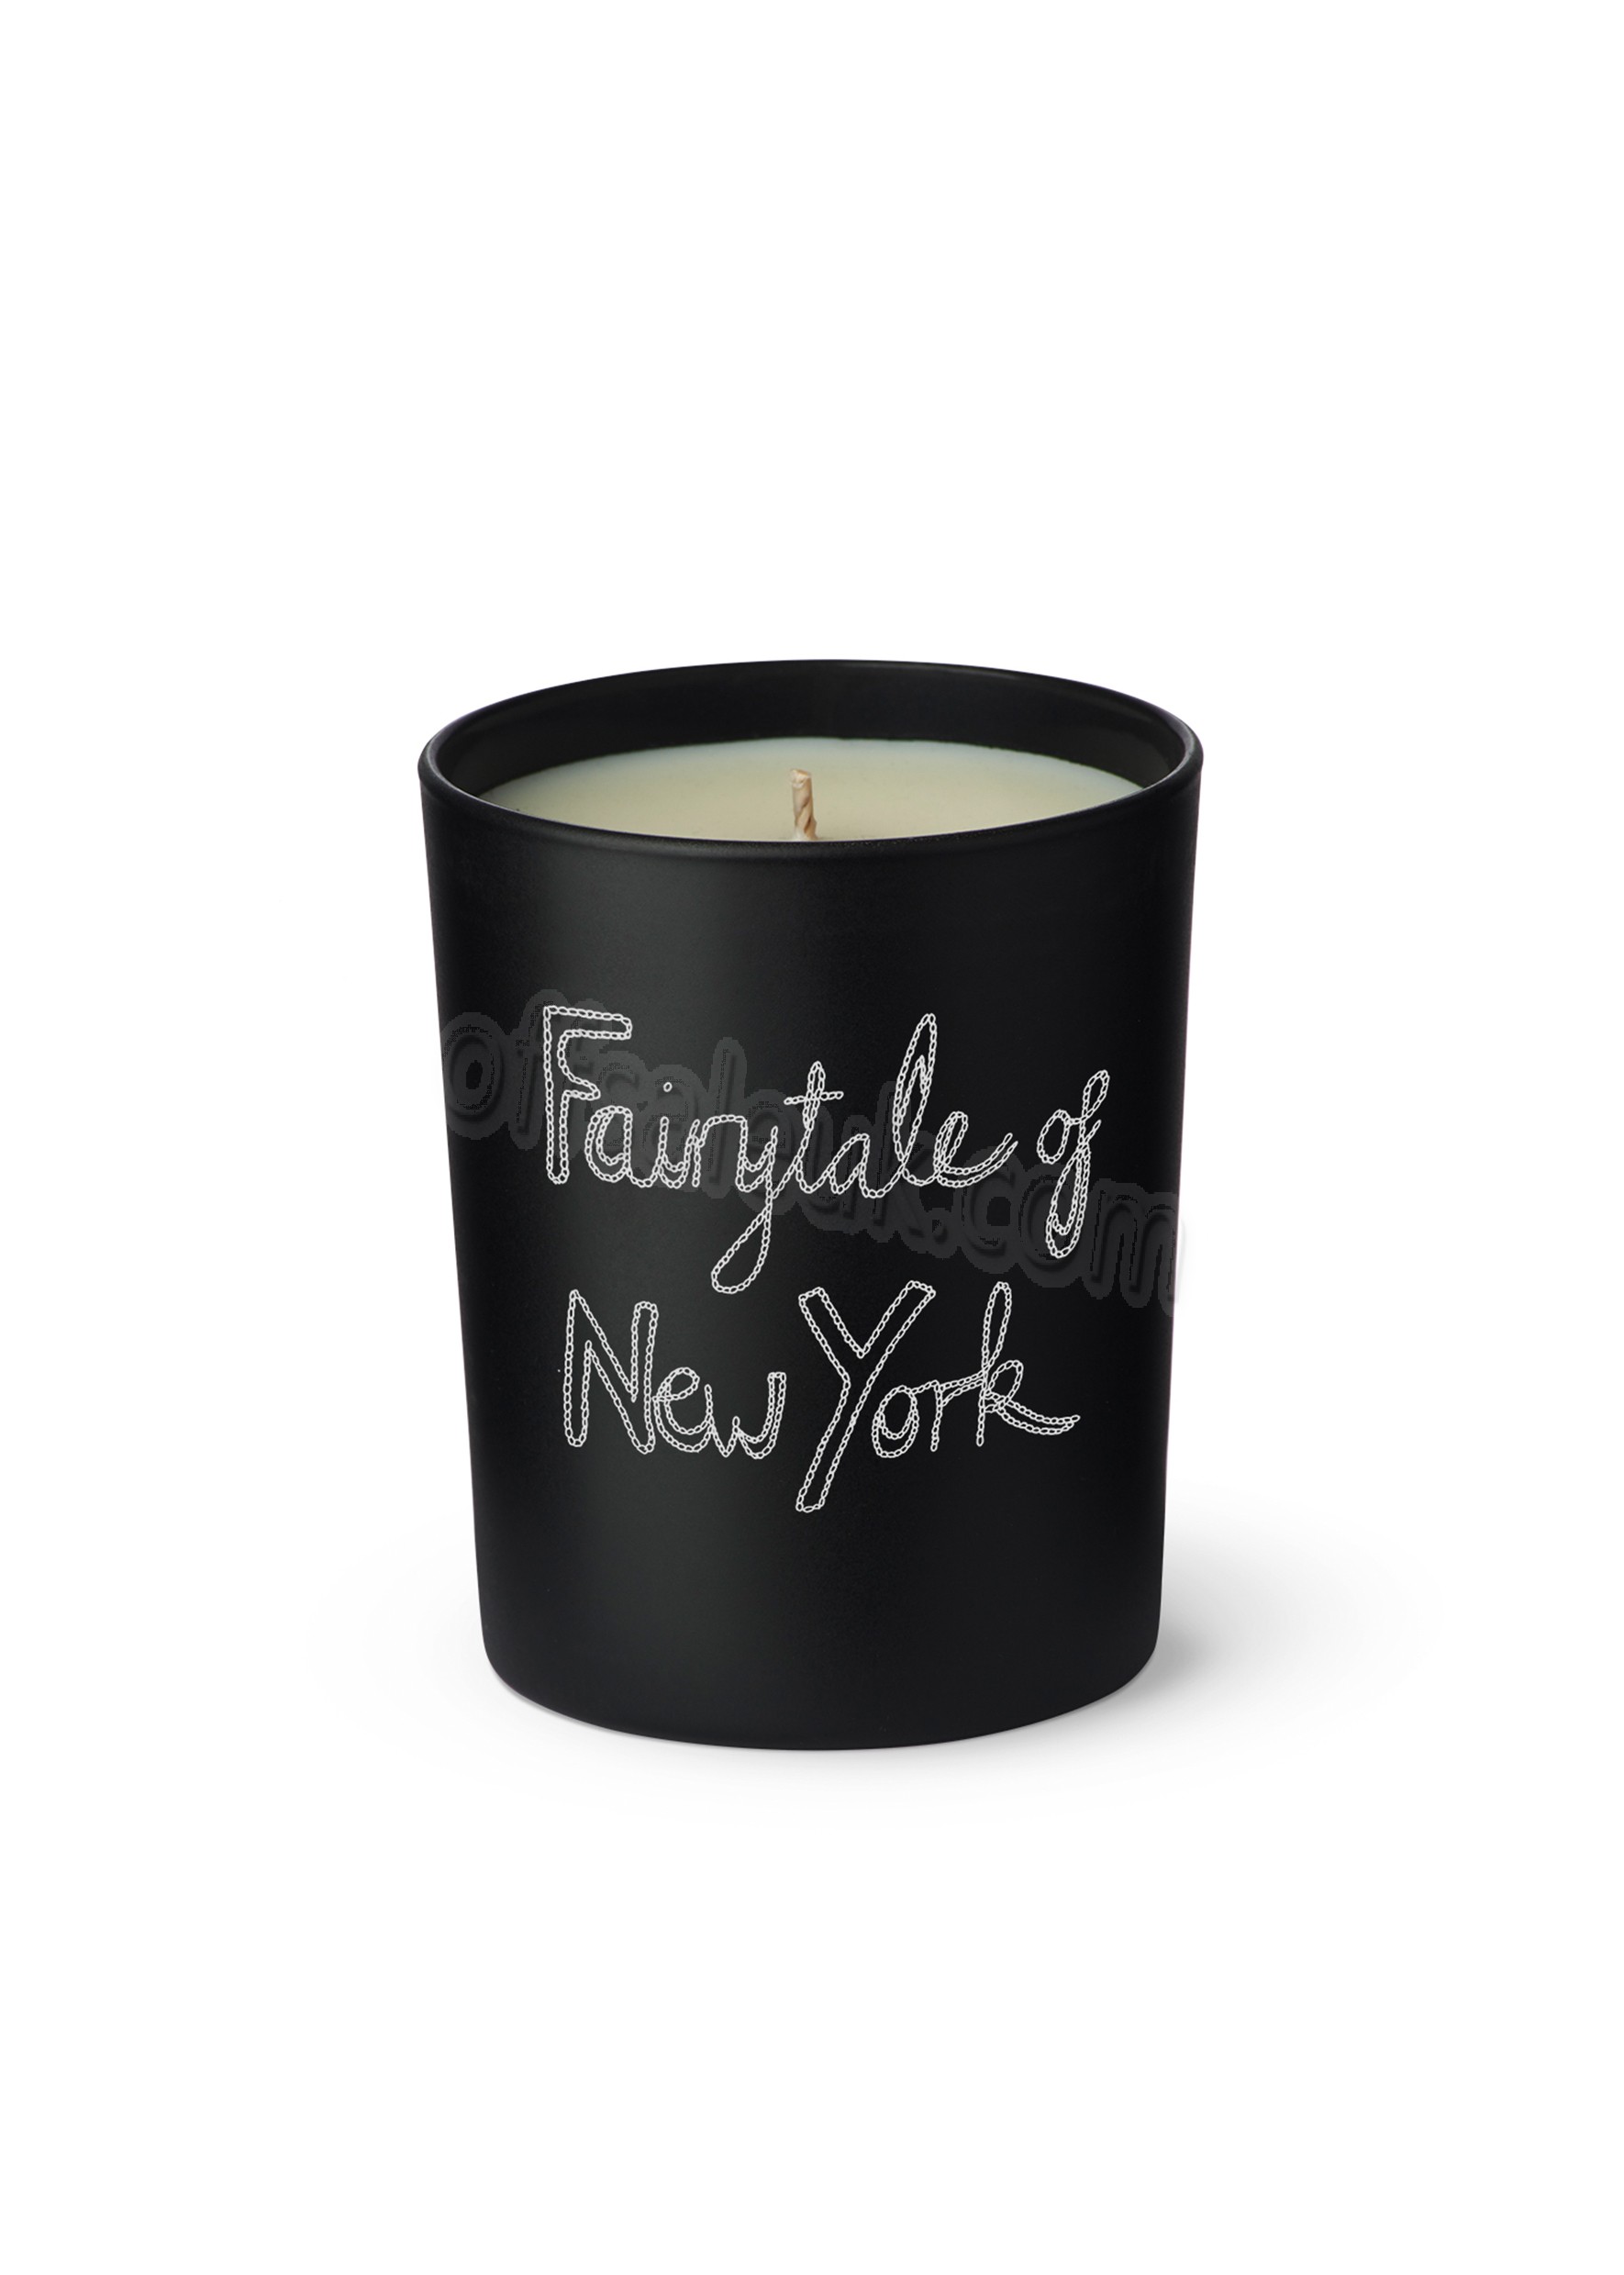 Cheap Fairytale of New York Candle - Cheap Fairytale of New York Candle